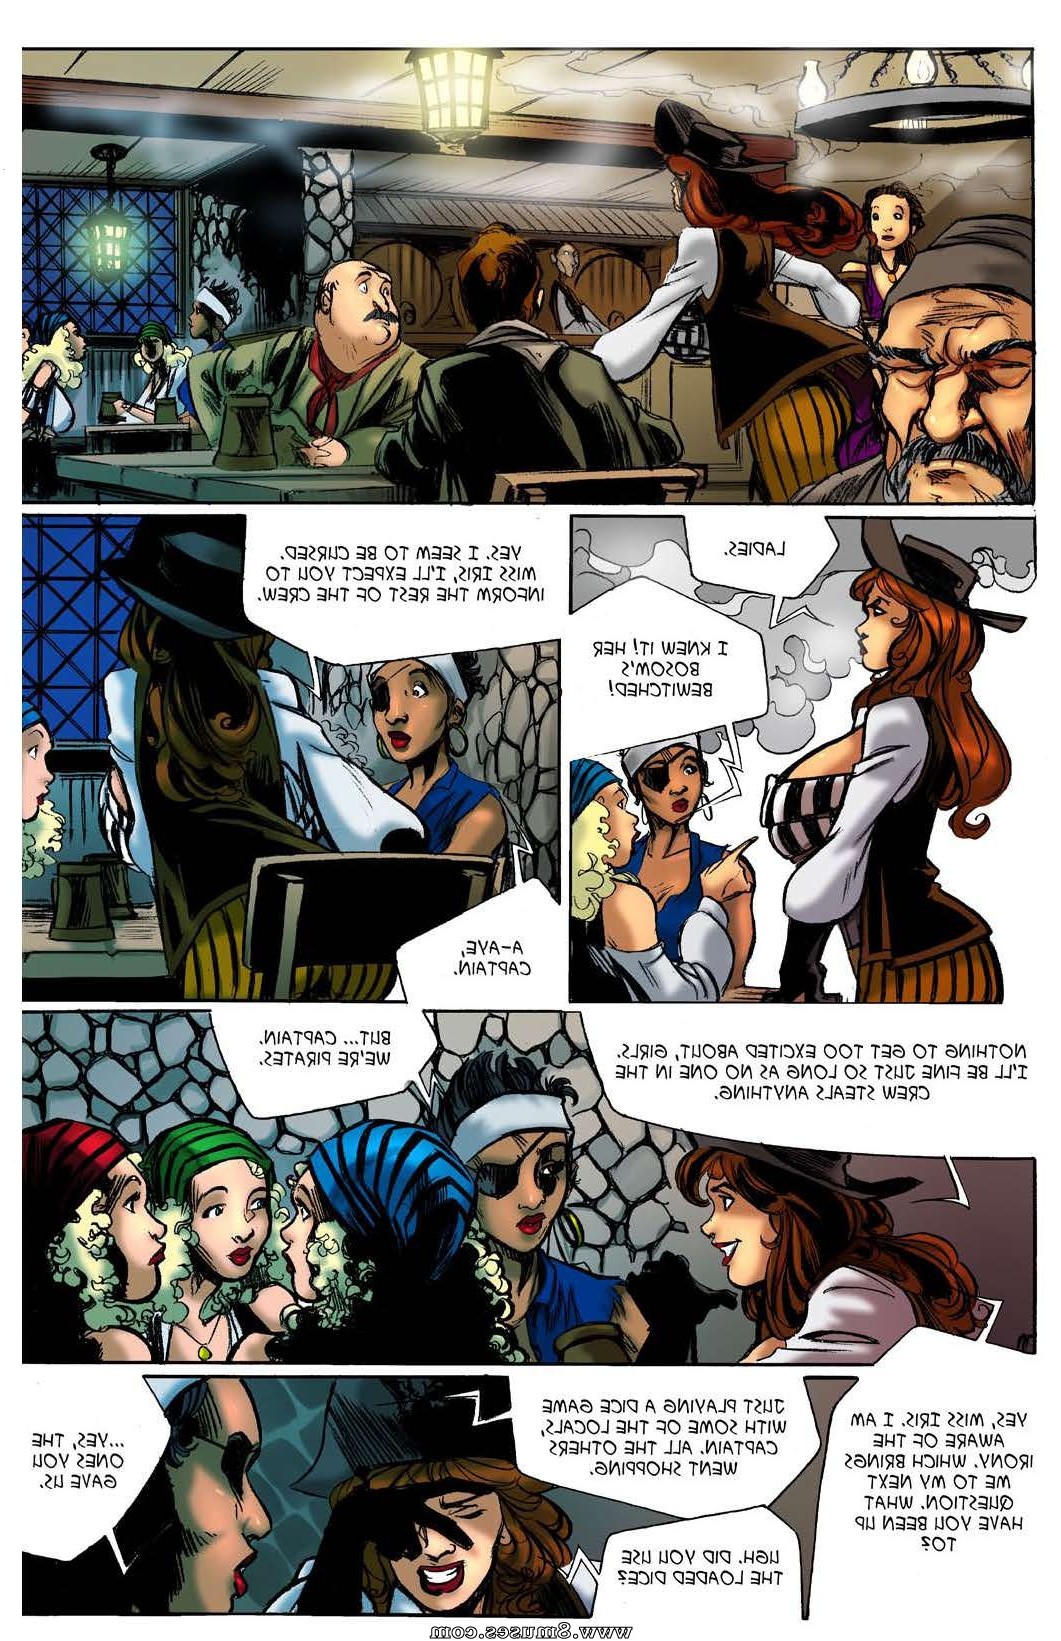 BE-Story-Club-Comics/A-Pirates-Life/Issue-2 A_Pirates_Life_-_Issue_2_6.jpg